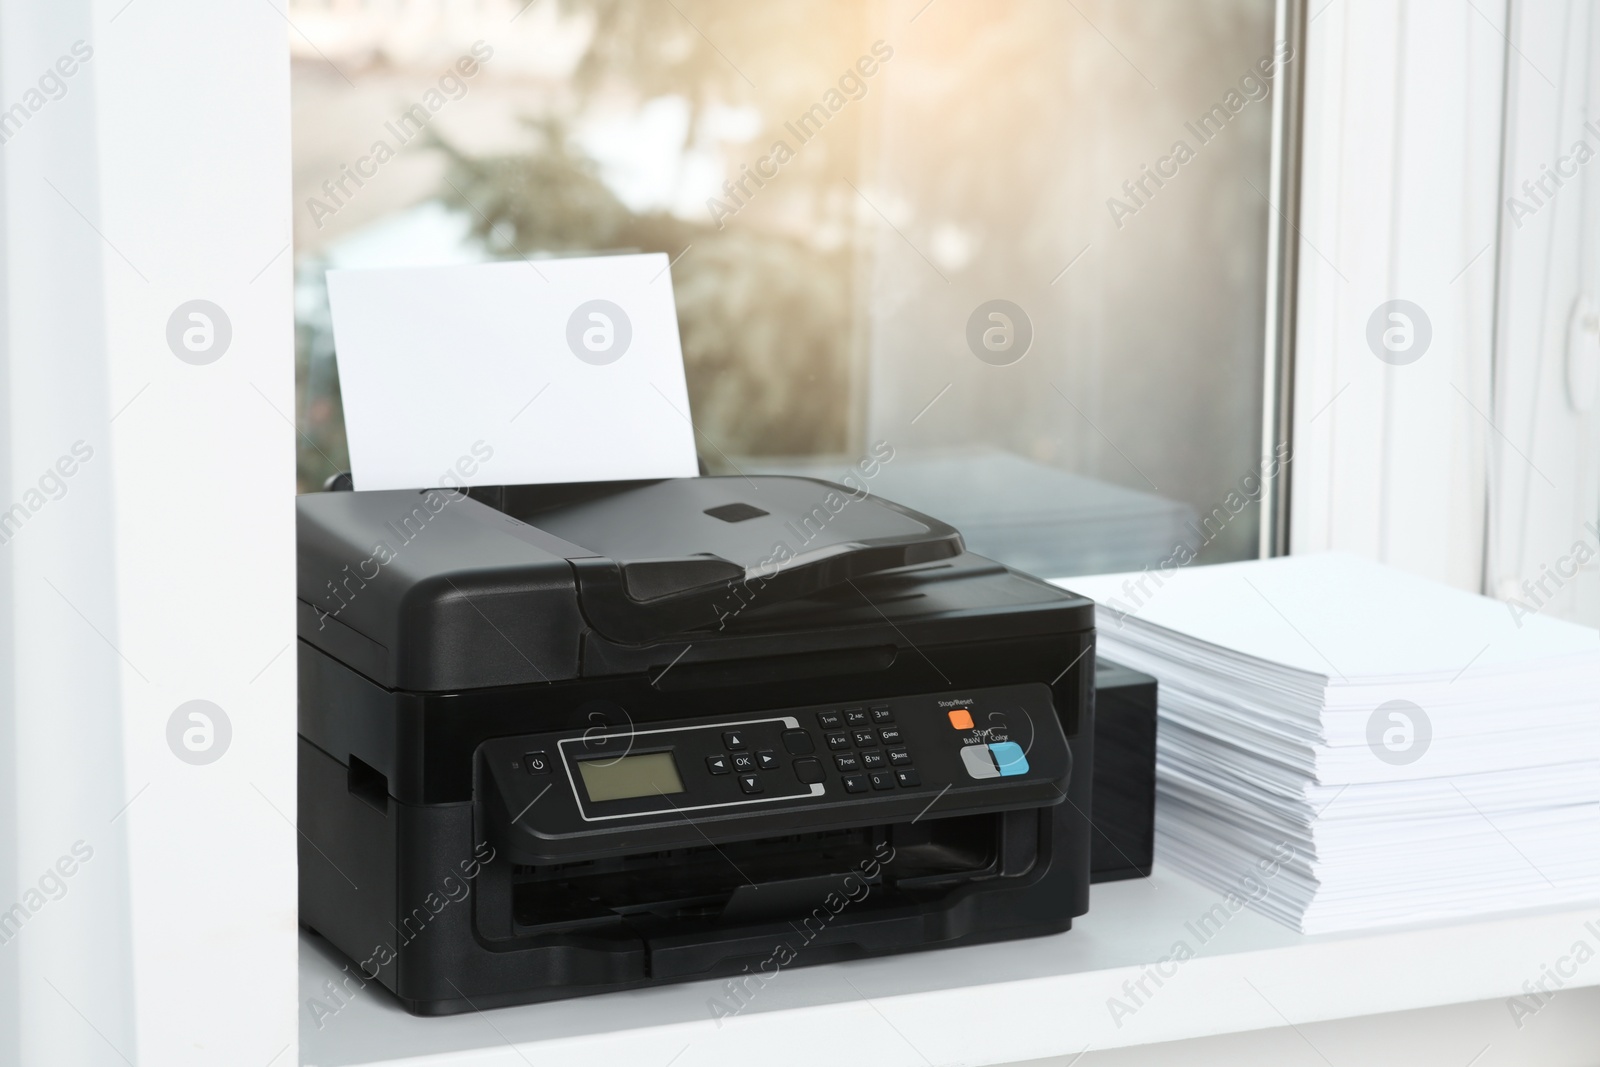 Photo of Modern printer and stack of paper on window sill indoors